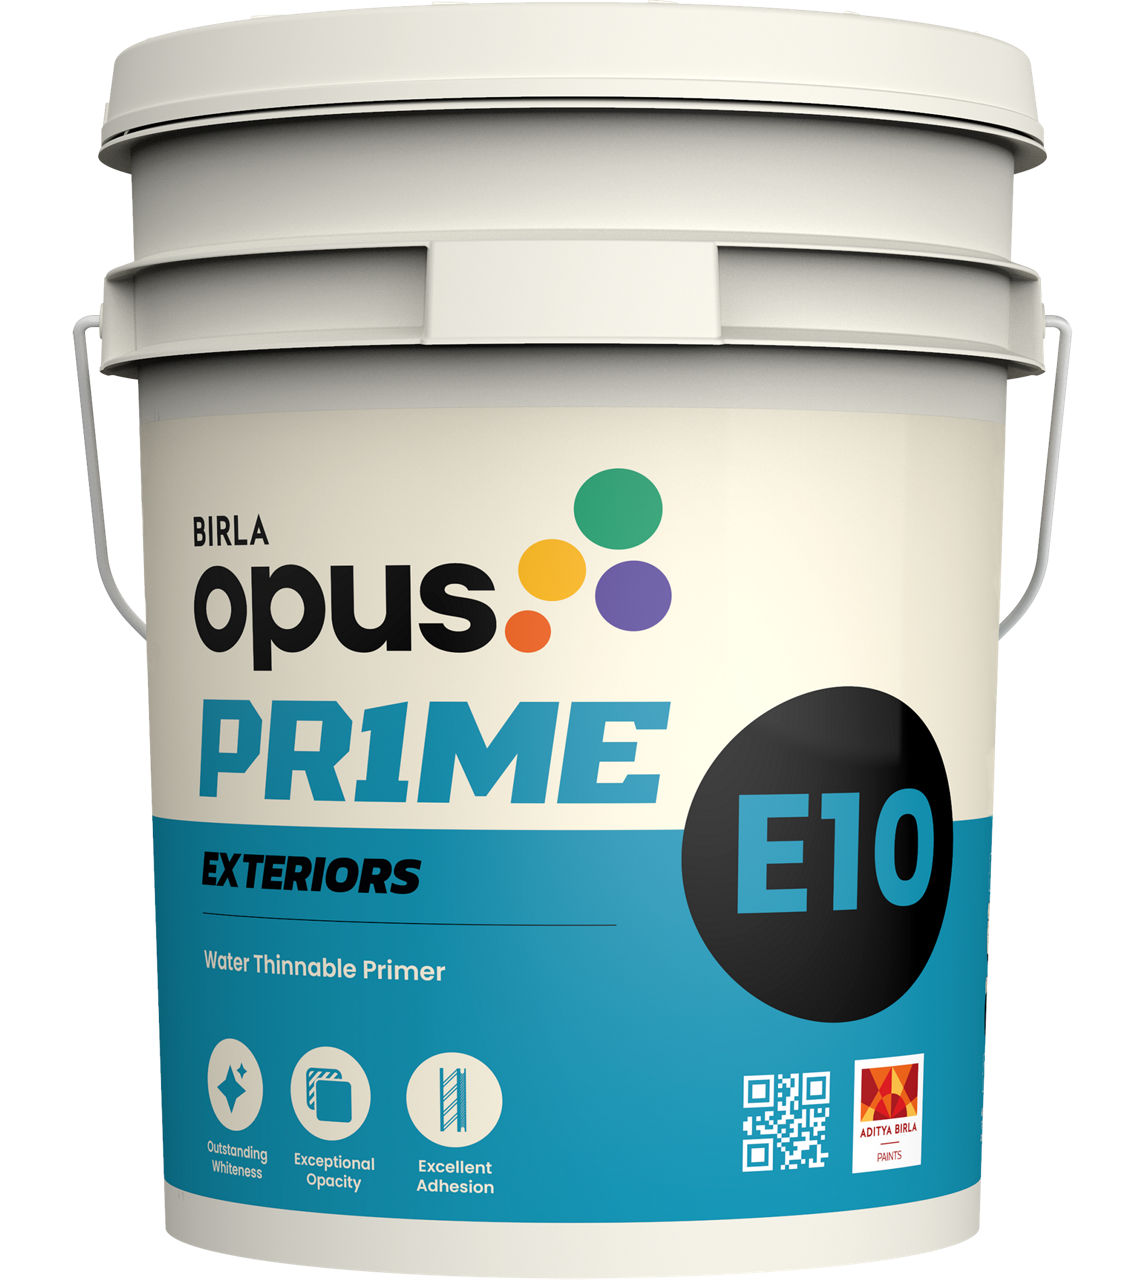 E10 Exterior Water Thinnable Primer